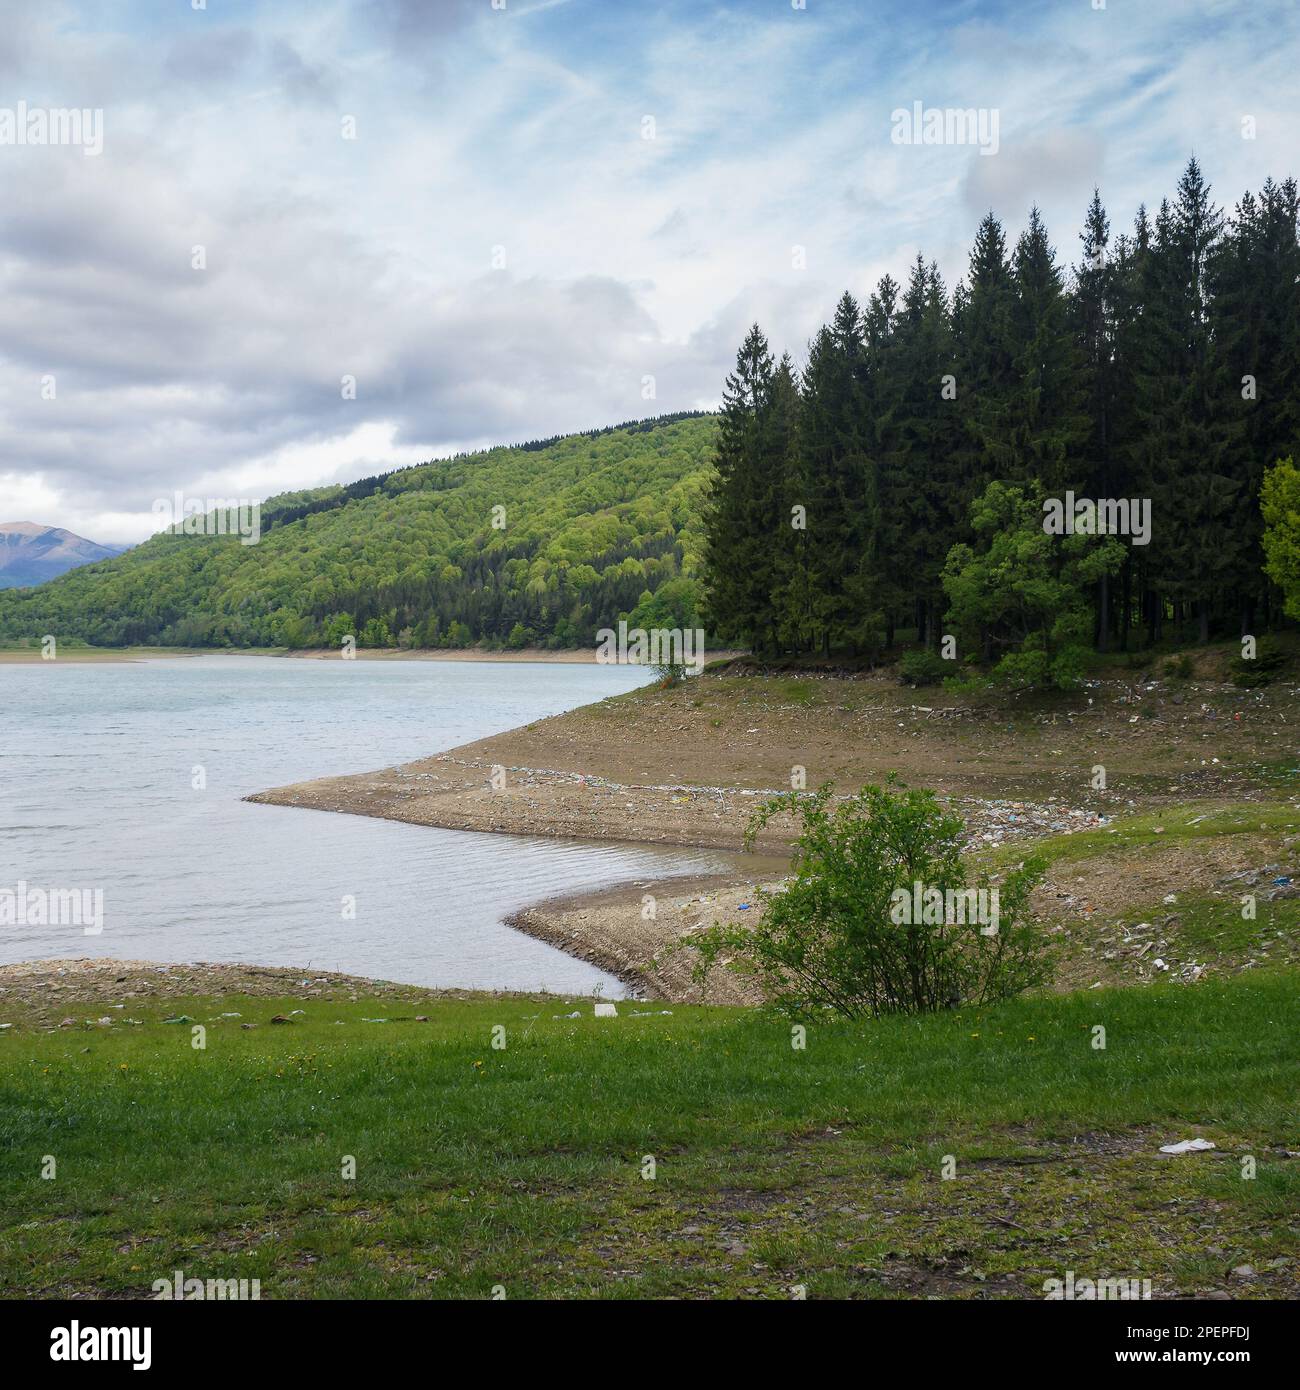 tereblya river water reserve. beautiful landscape in mountains polluted with plastic and garbage. drought in spring season Stock Photo